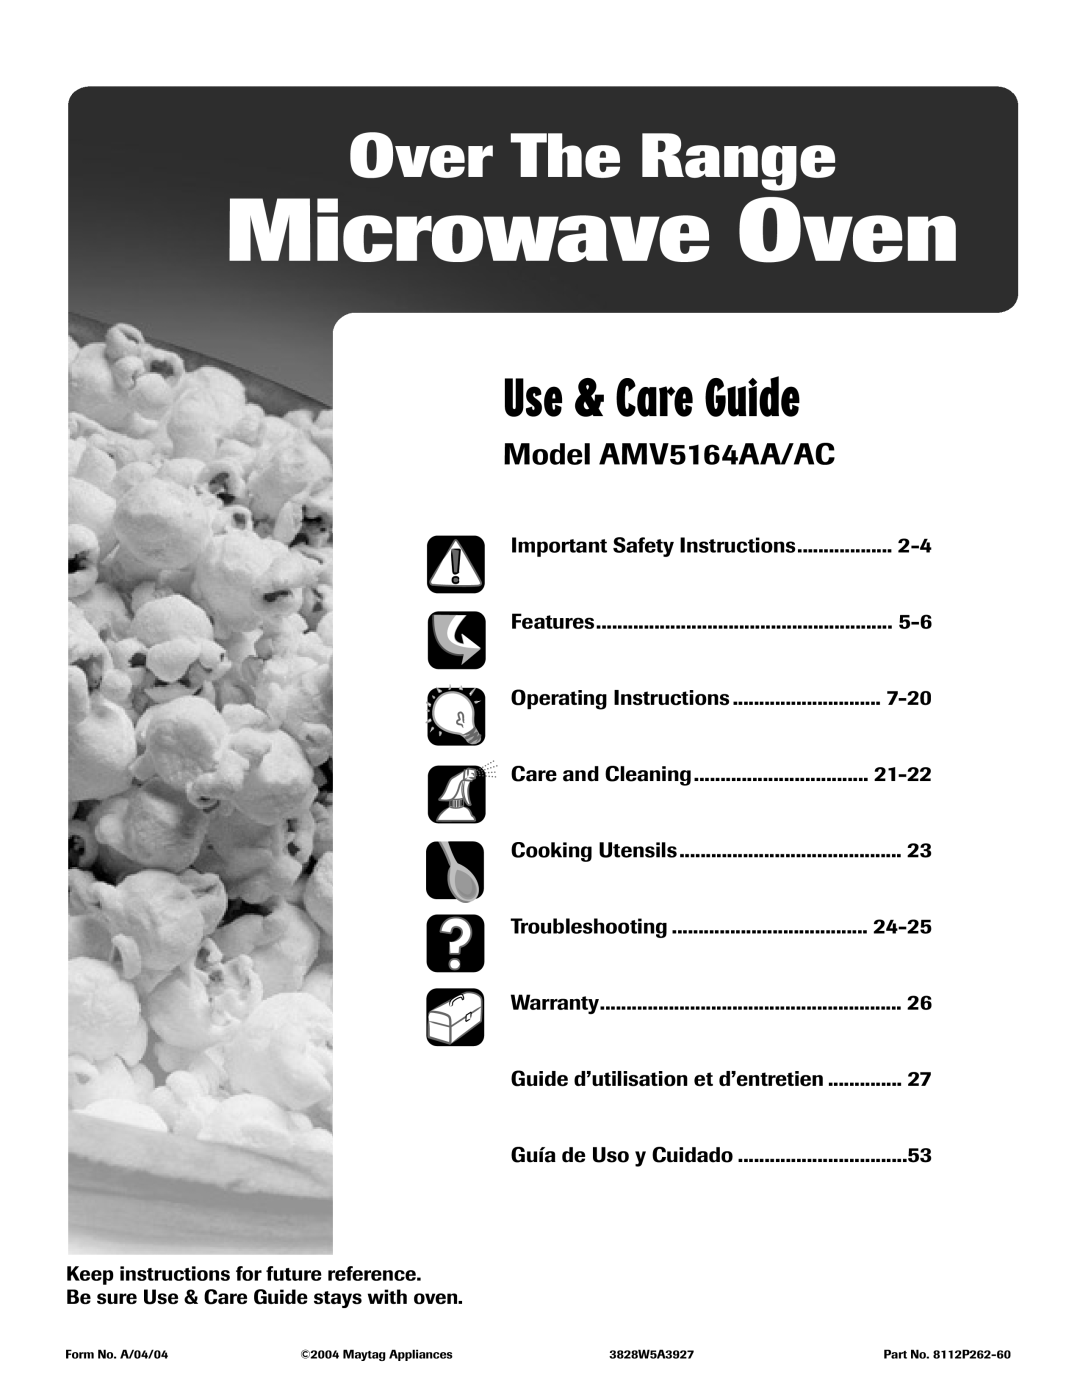 Maytag important safety instructions Model AMV5164AA/AC, Microwave Oven, Over The Range, Use & Care Guide, Features 